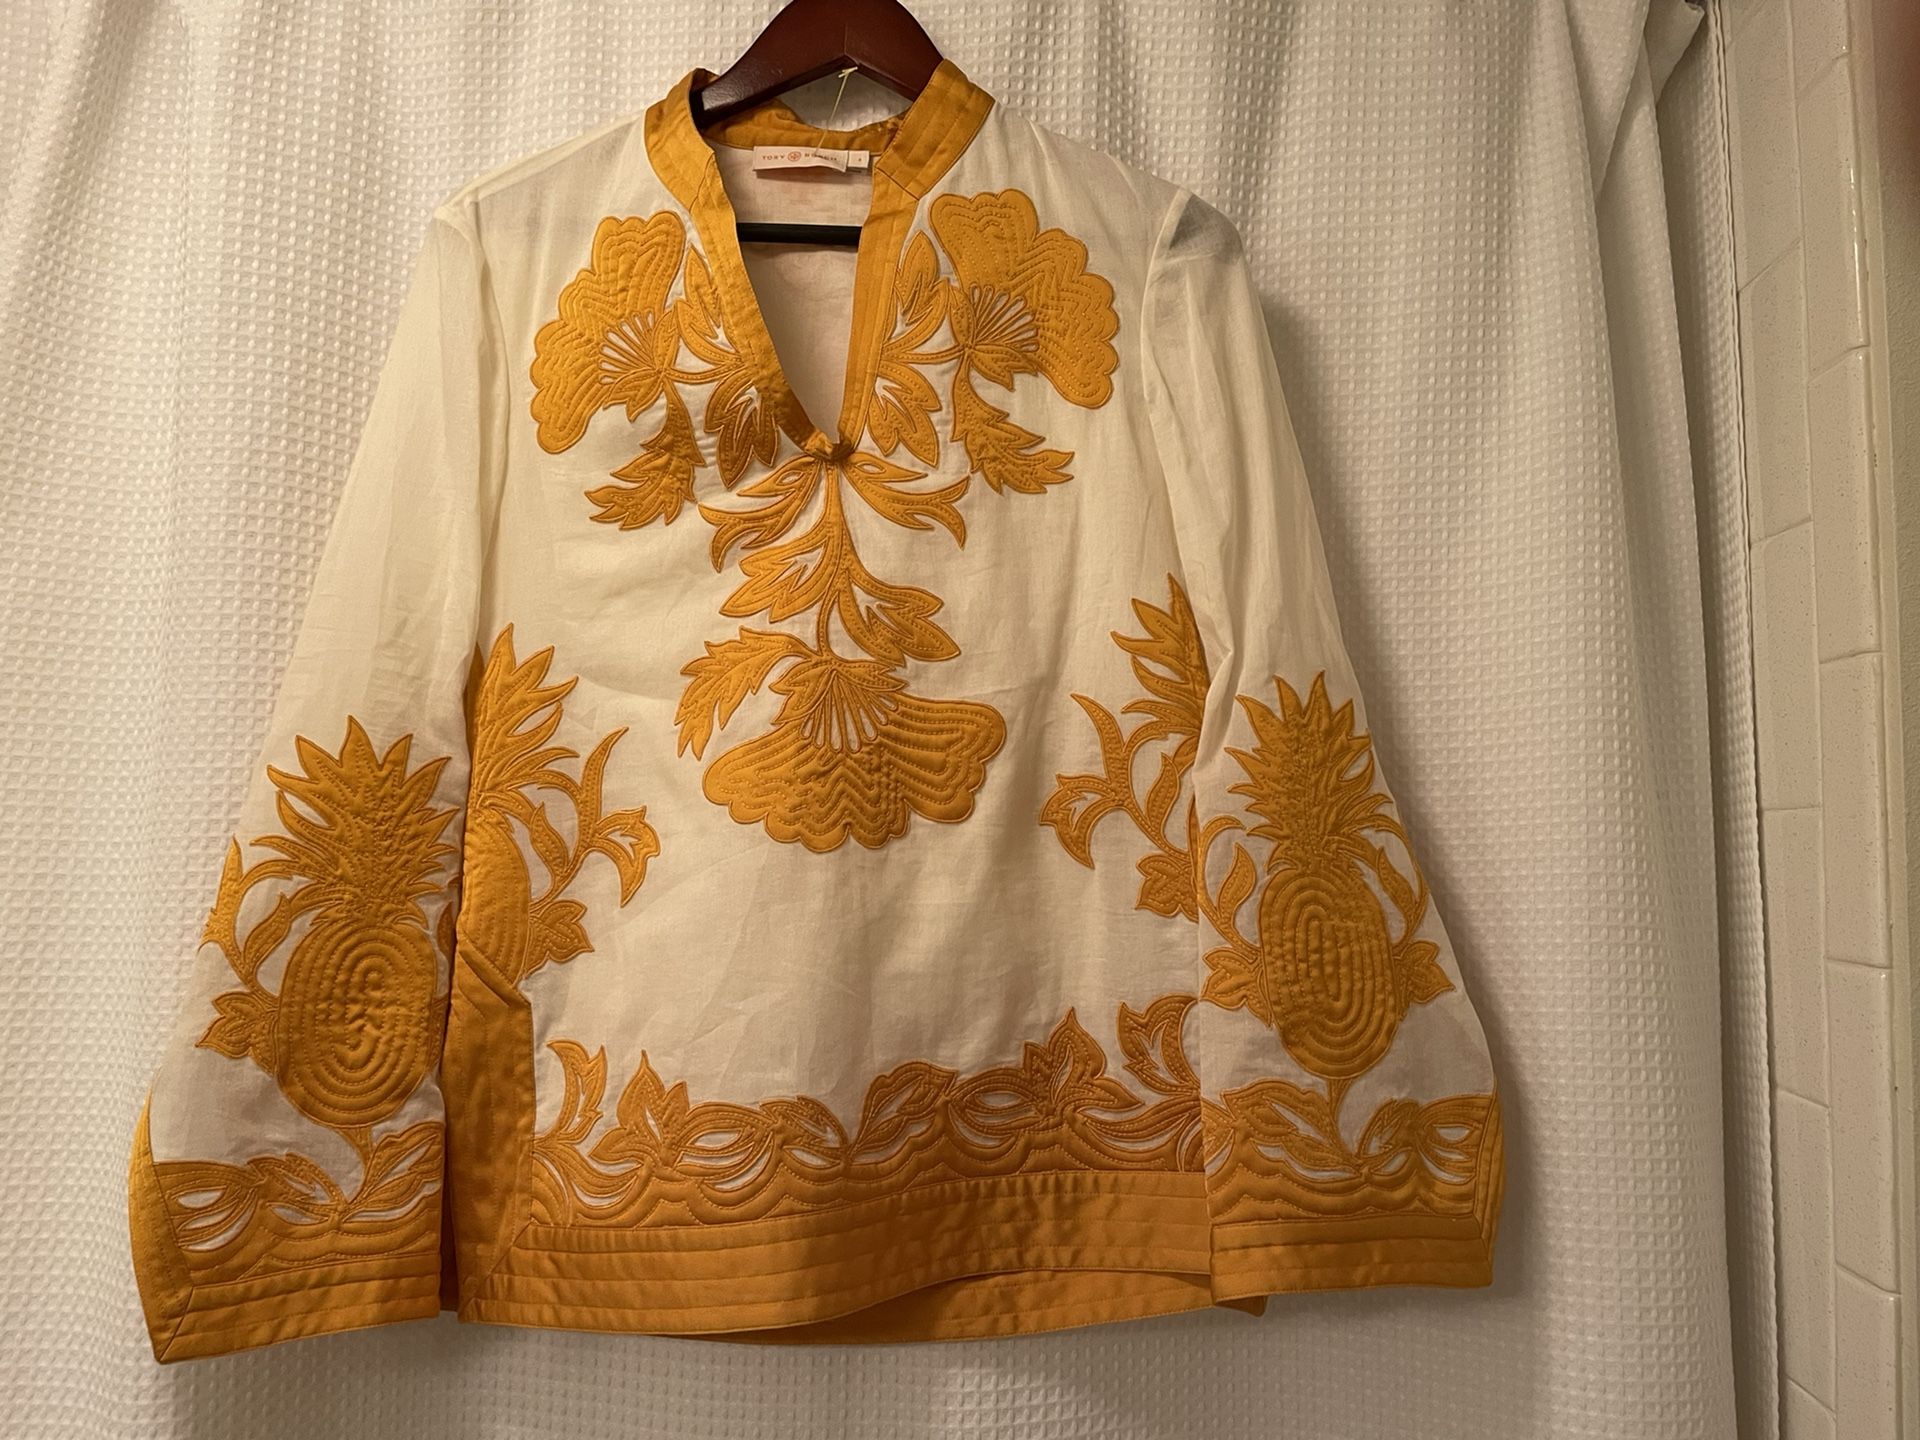 Tory Burch Tunic , Size 4, Ivory And Tangerine Color, Excellent Condition 